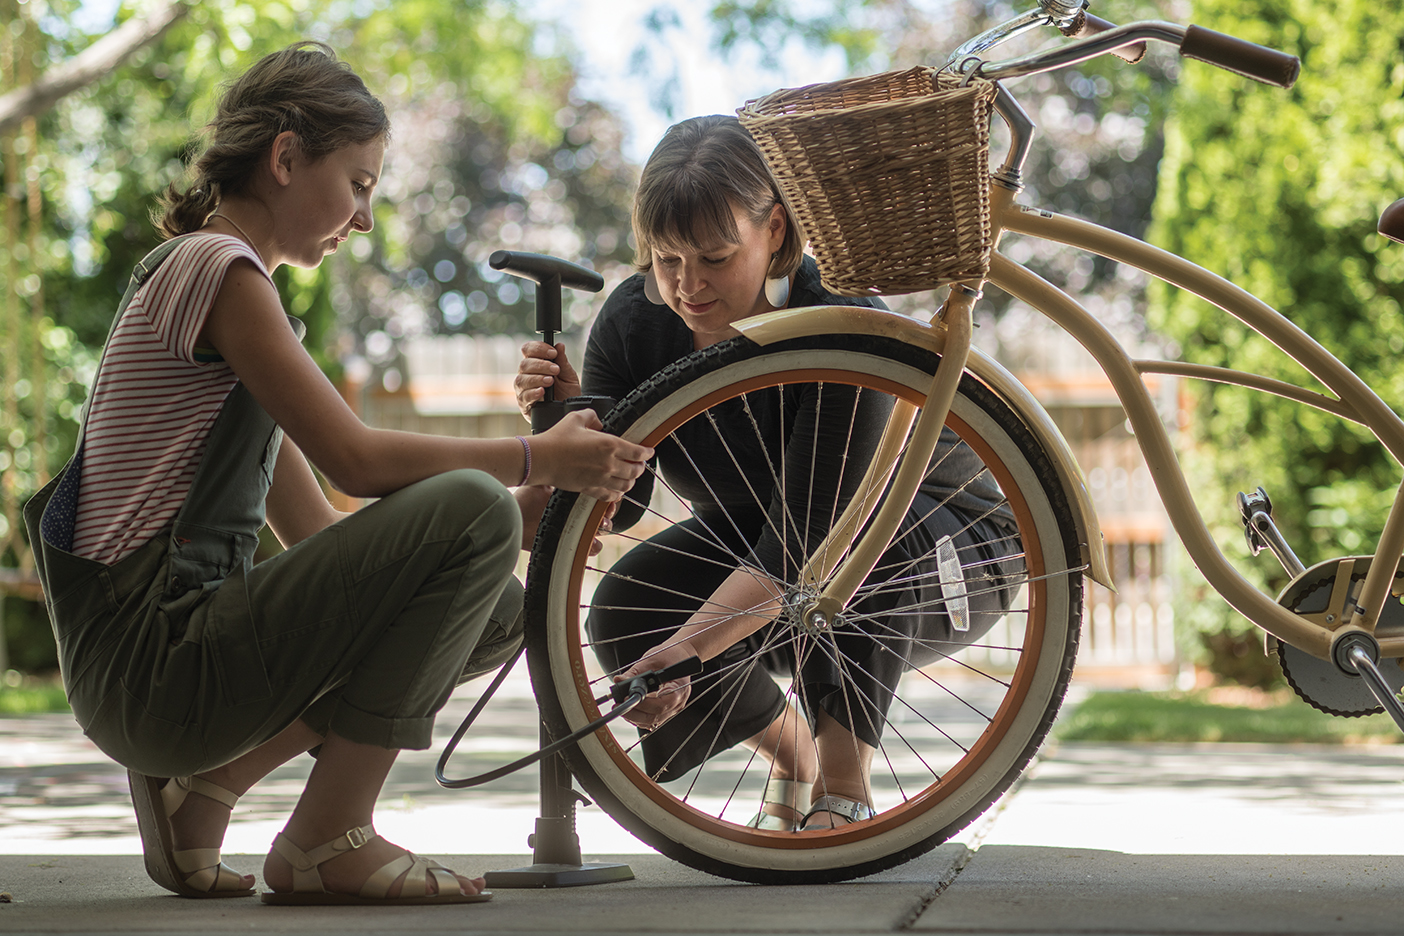 A mother bends down as she helps her daughter pump up a bicycle tire.